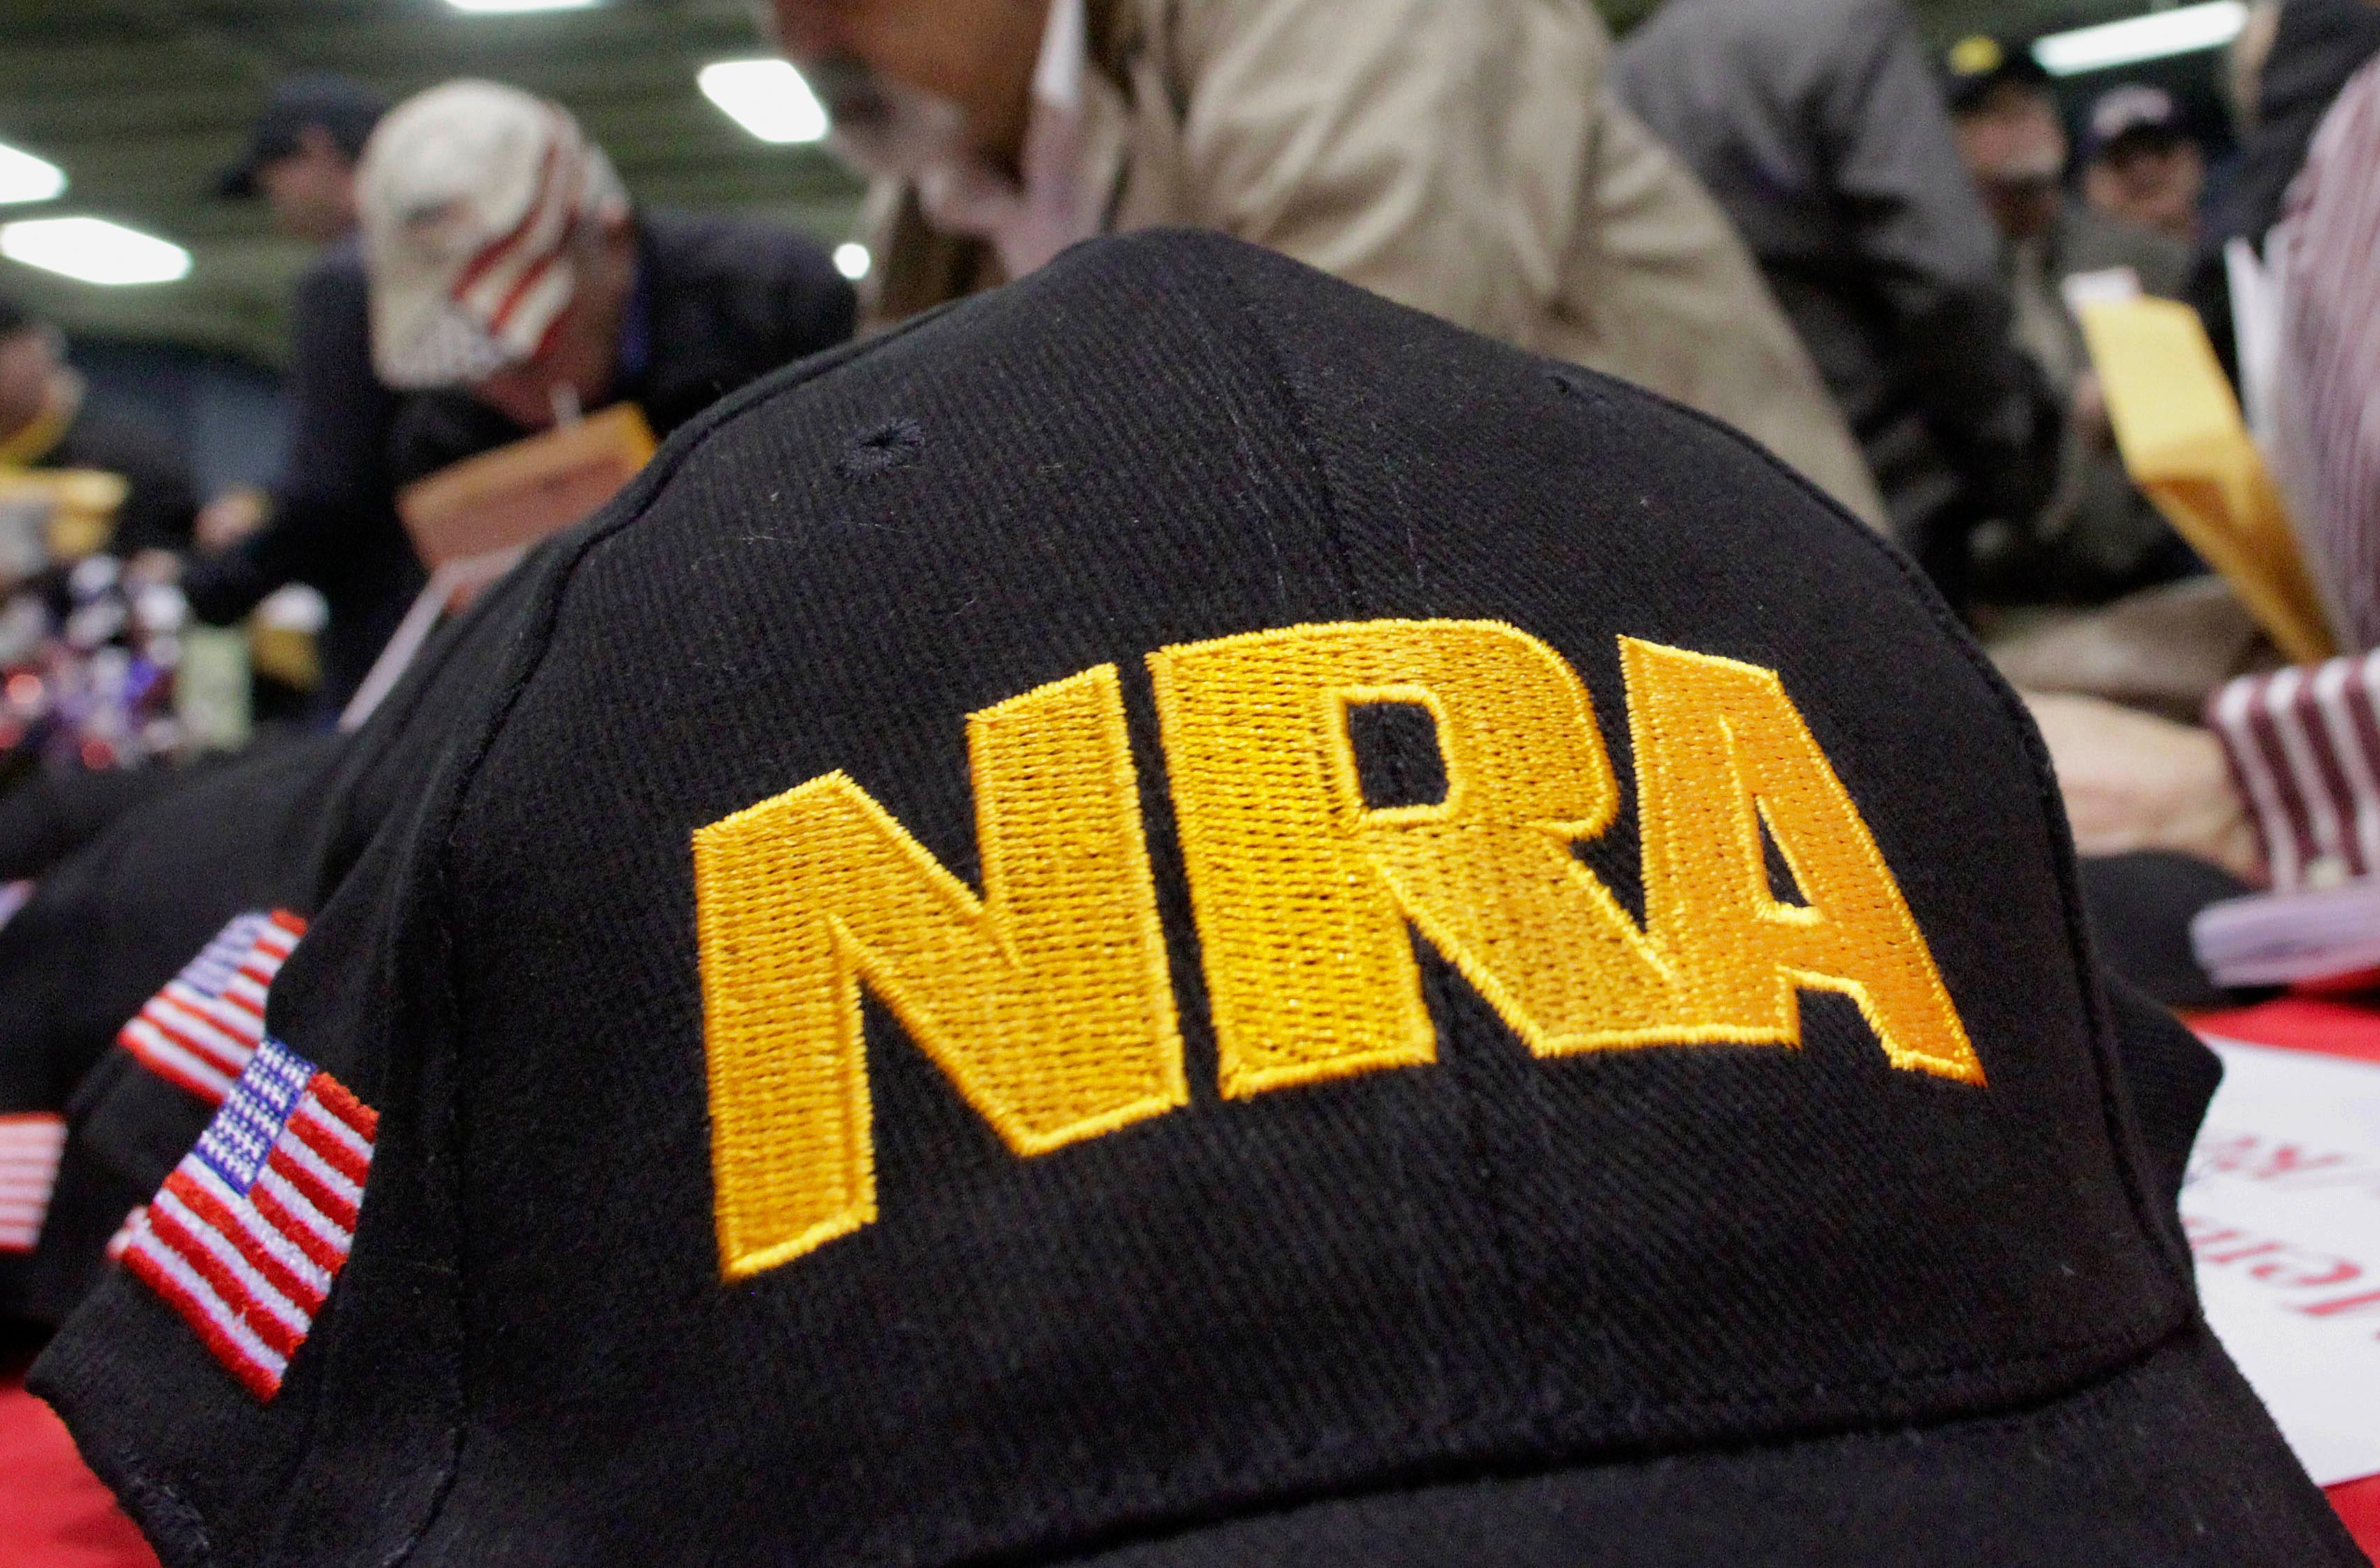 NRA says Indianapolis assault weapon proposal seeks to &apos;drum up unnecessary fear&apos;